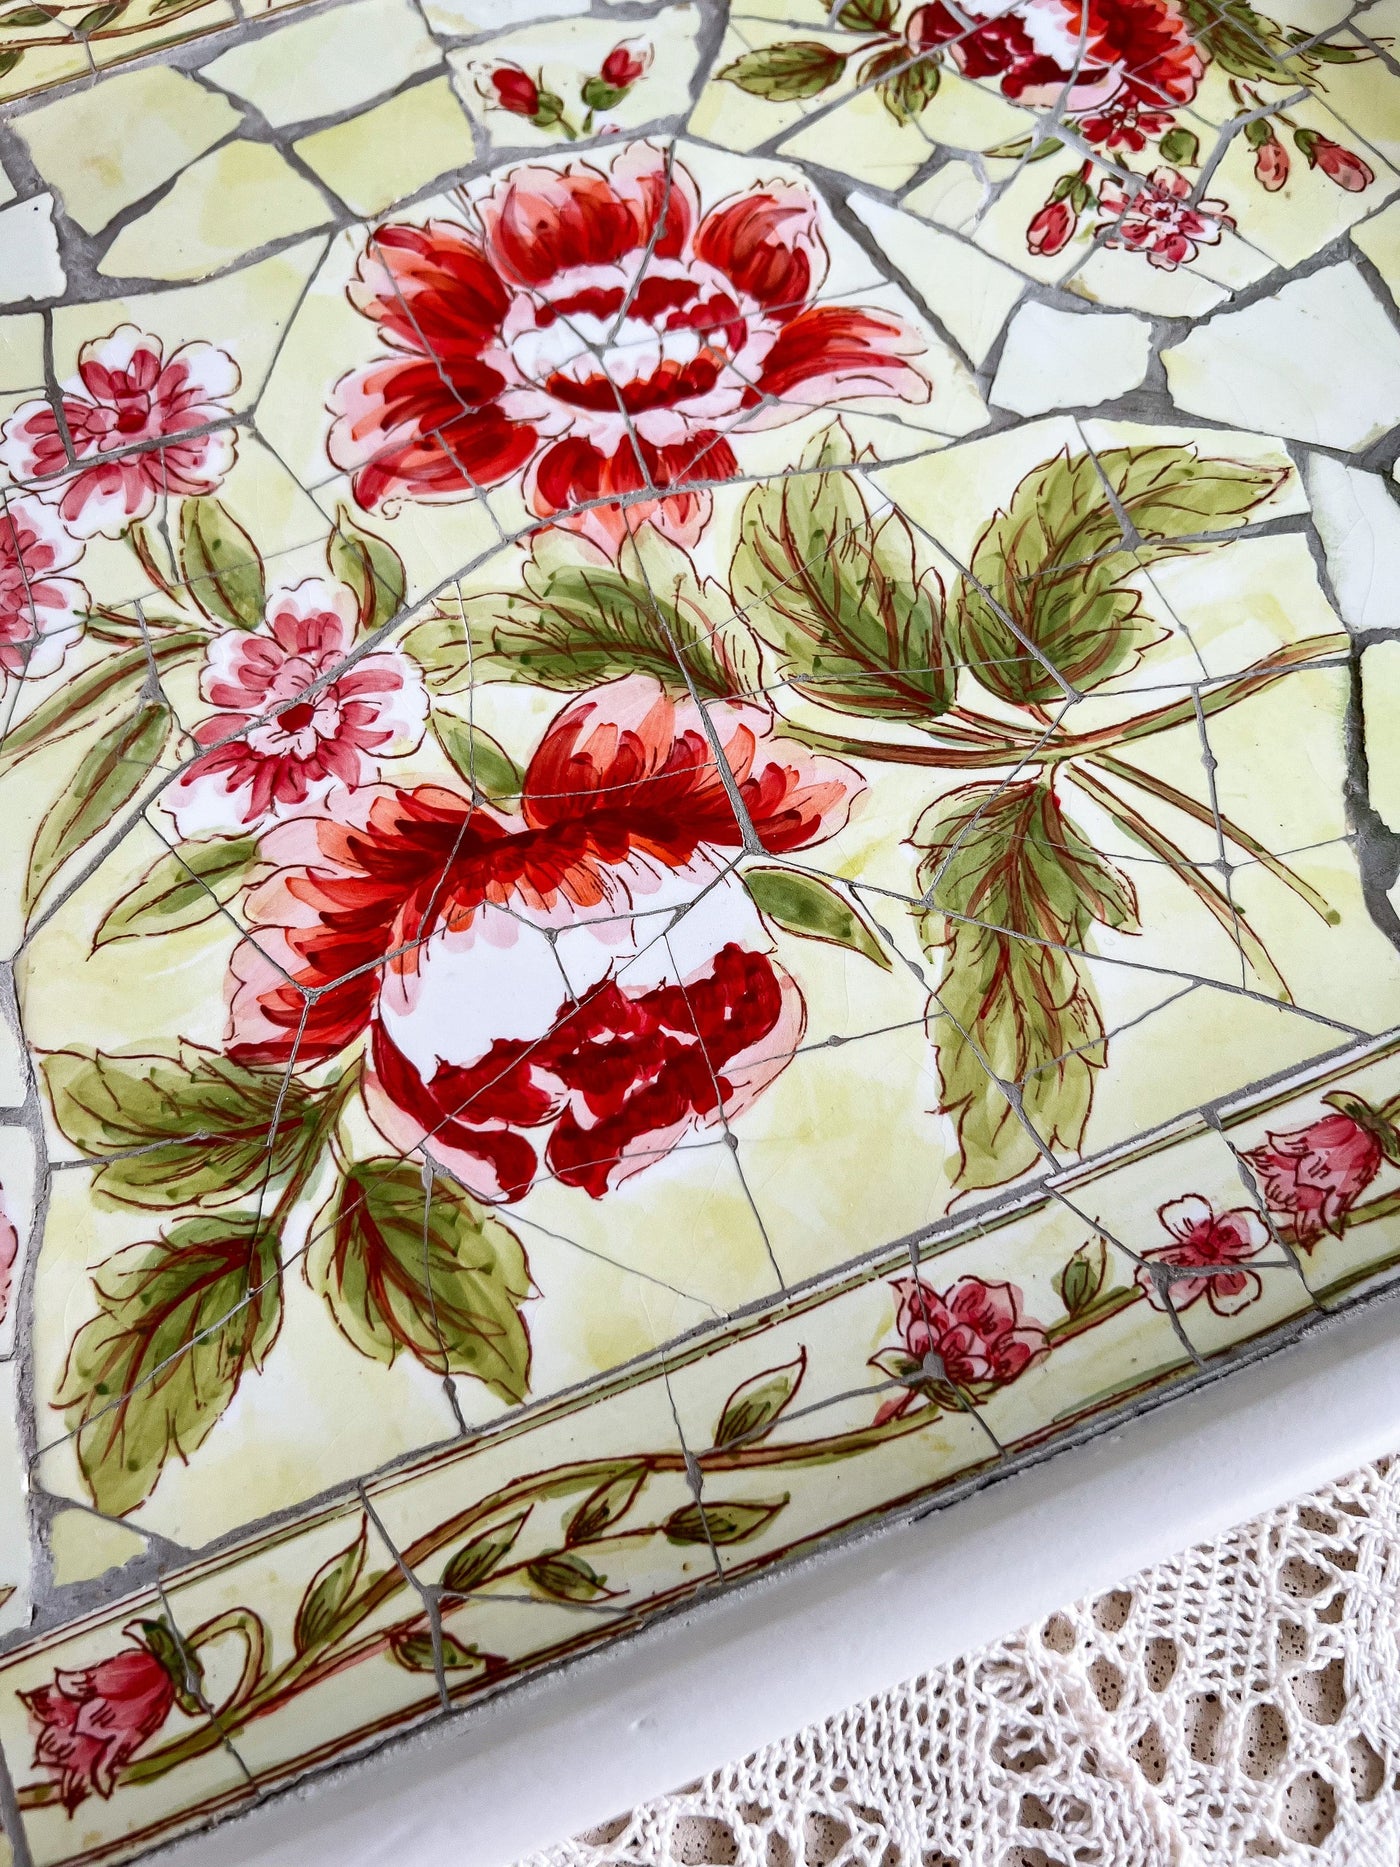 Handcrafted Vintage Red Floral Mosaic Serving Tray Revive In Style Vintage Furniture Painted Refinished Redesign Beautiful One of a Kind Artistic Antique Unique Home Decor Interior Design French Country Shabby Chic Cottage Farmhouse Grandmillenial Coastal Chalk Paint Metallic Glam Eclectic Quality Dovetailed Rustic Furniture Painter Pinterest Bedroom Living Room Entryway Kitchen Home Trends House Styles Decorating ideas